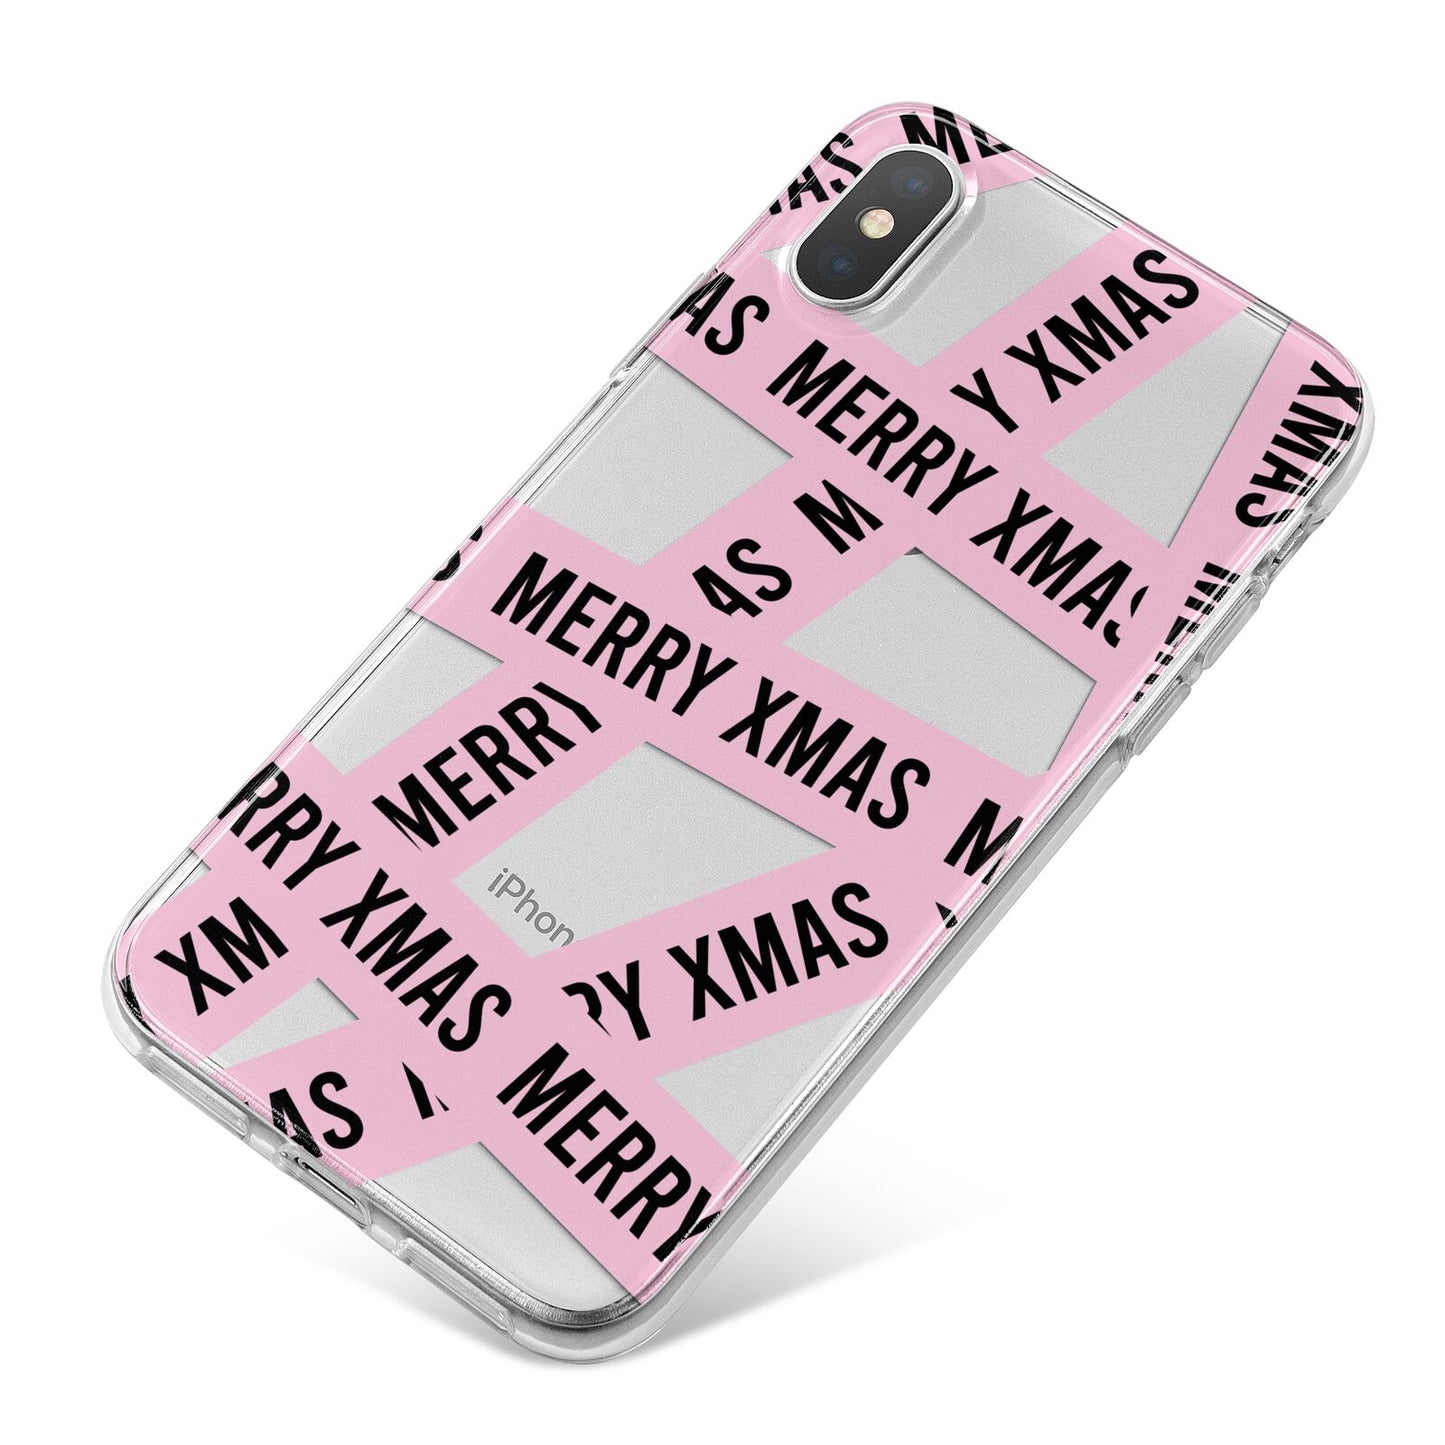 Merry Christmas Tape iPhone X Bumper Case on Silver iPhone